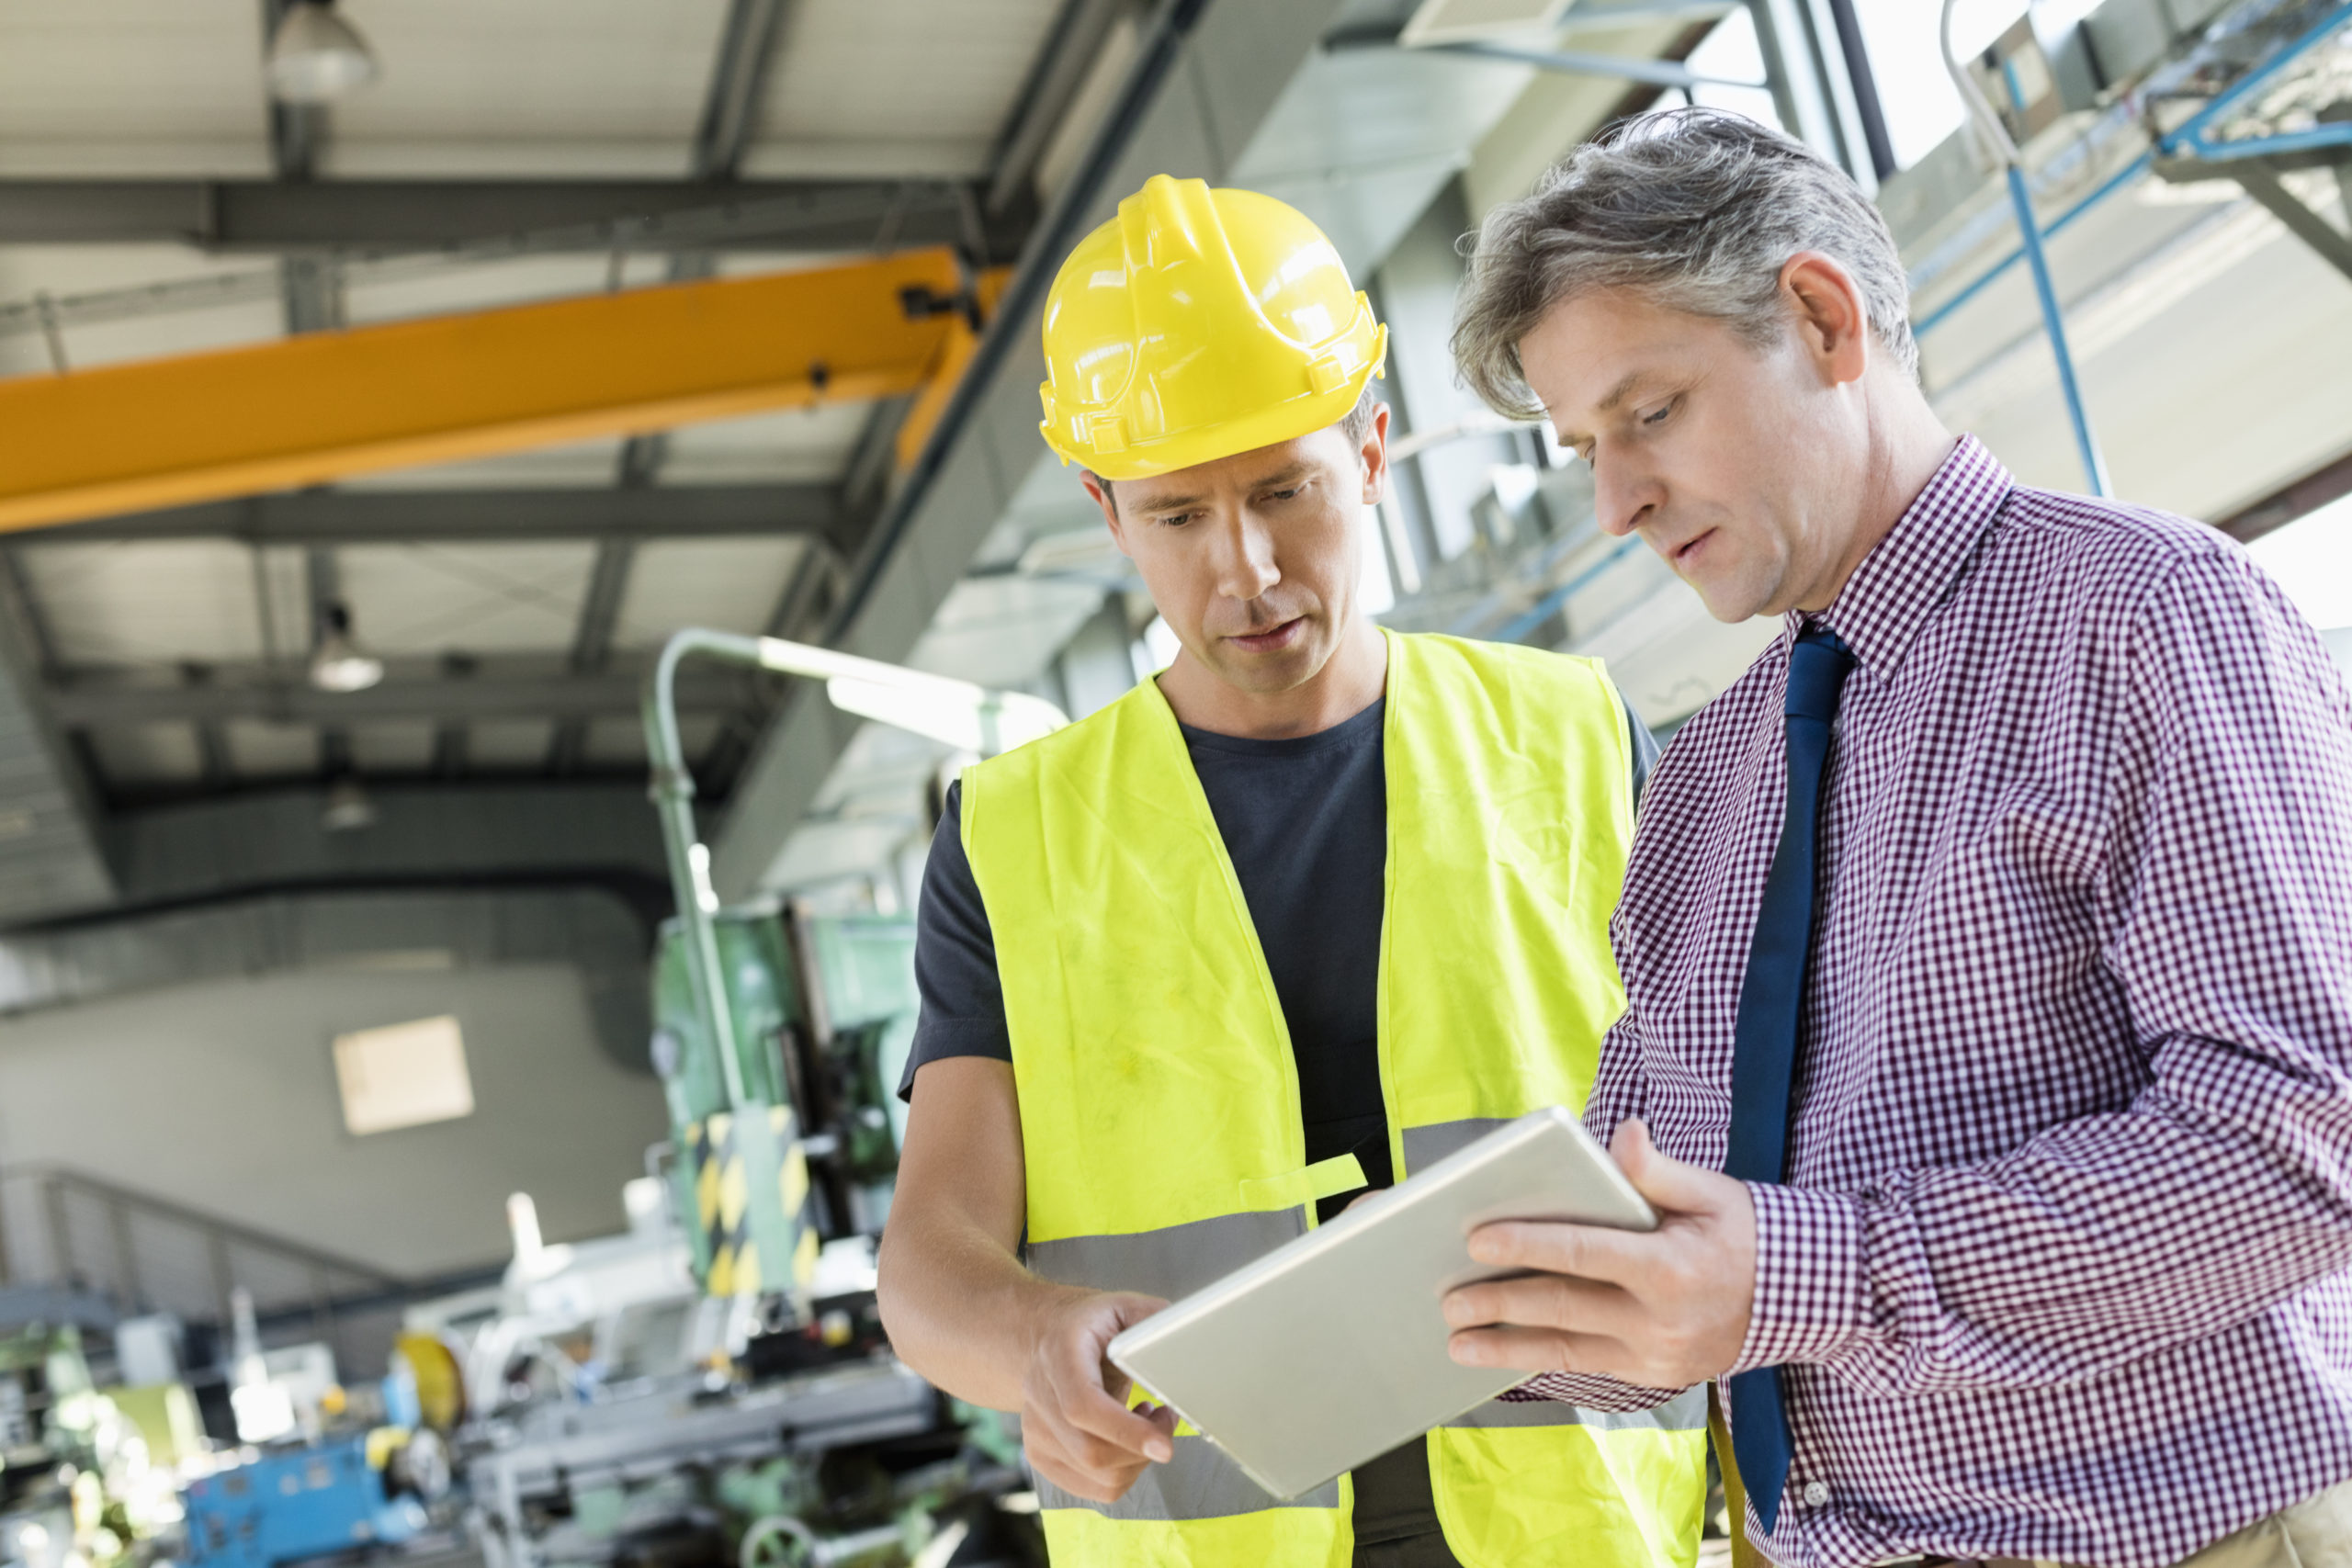 The Benefits of Outsourcing Health and Safety displayed by a worker and manager in a warehouse discussing plans over a tablet. The worker is wearing high visibility PPE and a hard hat.